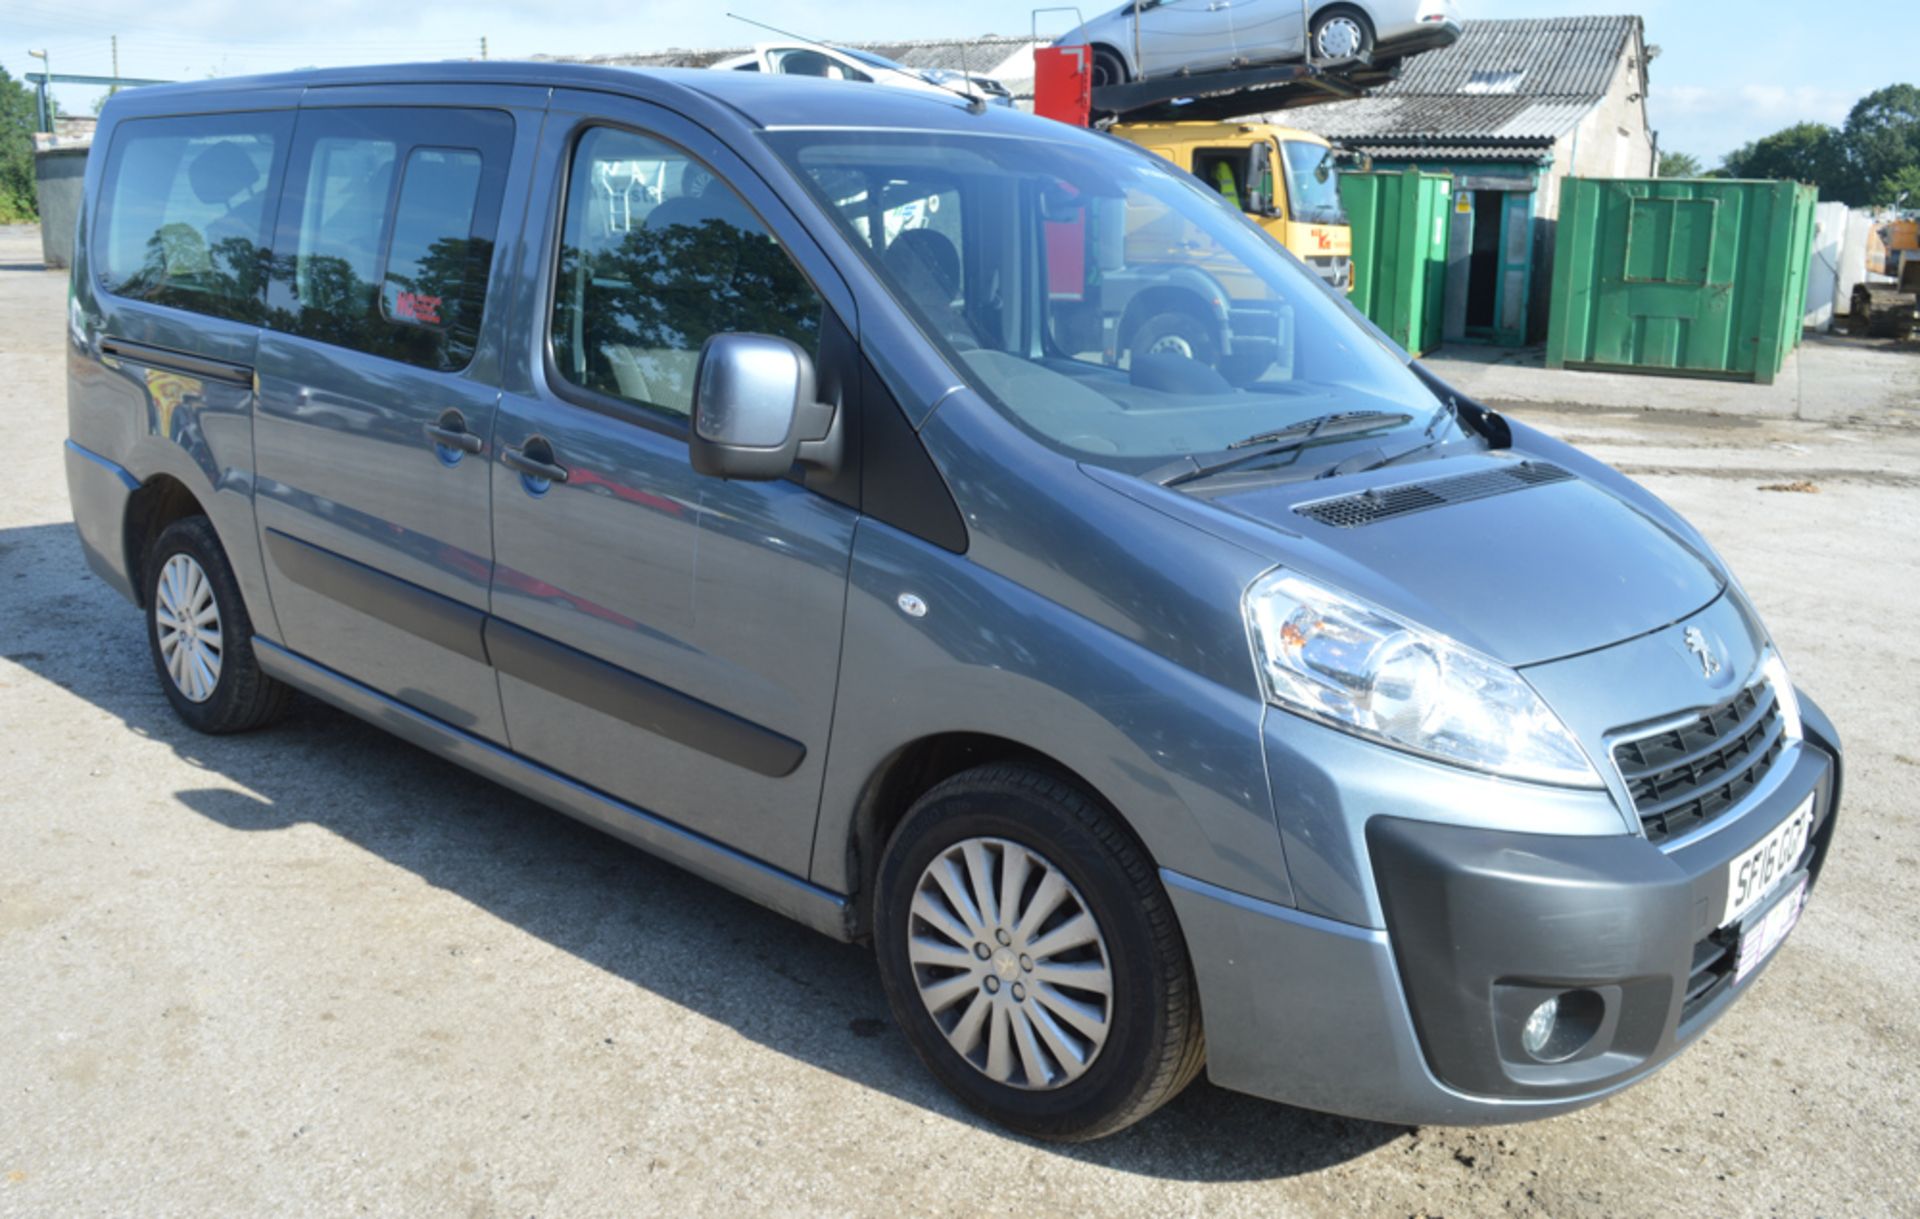 Peugeot Expert Tepee Independence SE Plus 6 seater minibus Registration number: SF16 GGP Date of